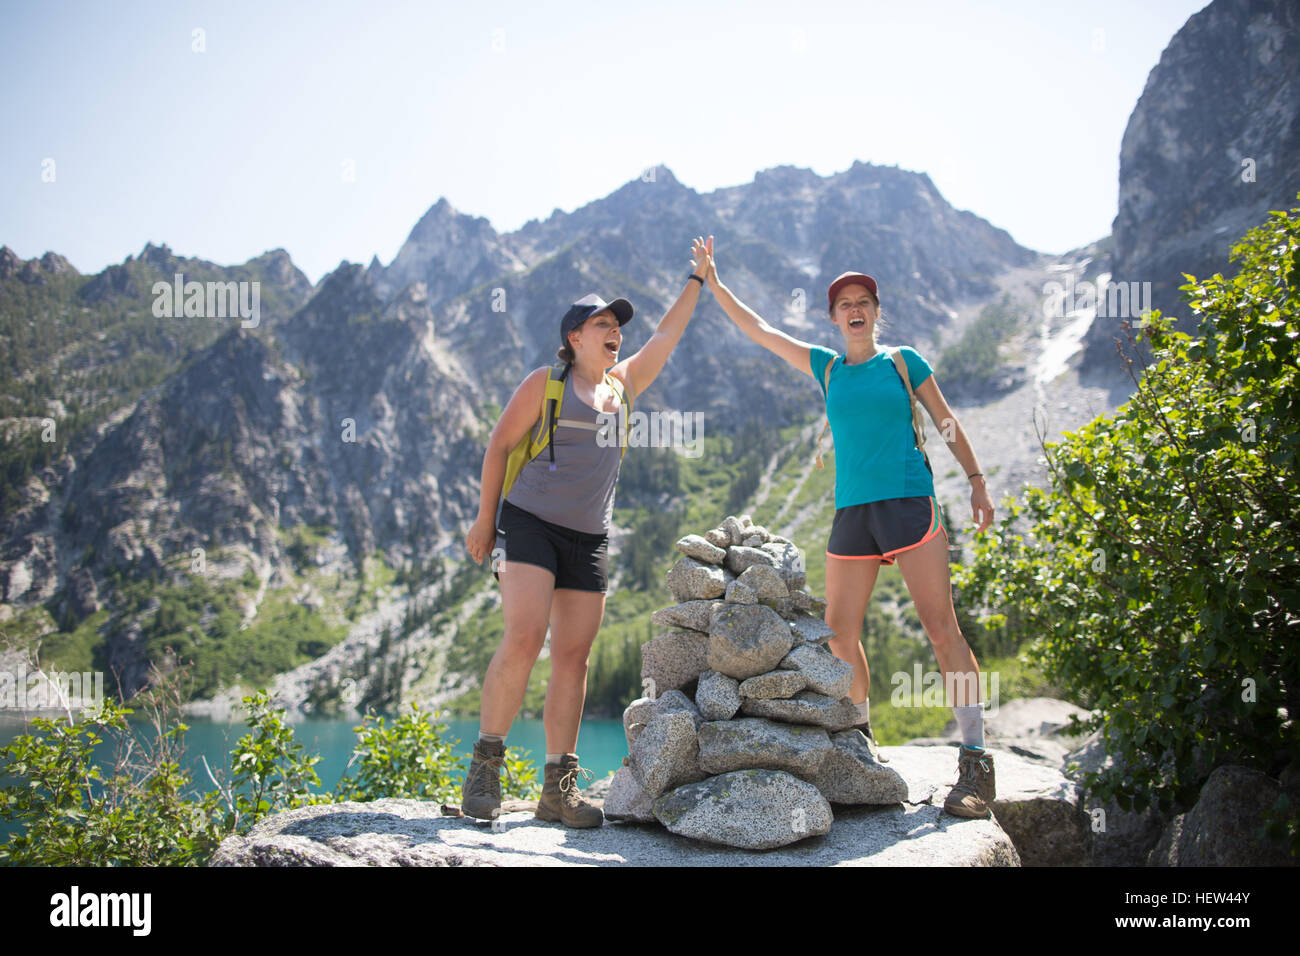 Two young women standing by pile of rocks, giving high-five, The Enchantments, Alpine Lakes Wilderness, Washington, USA Stock Photo